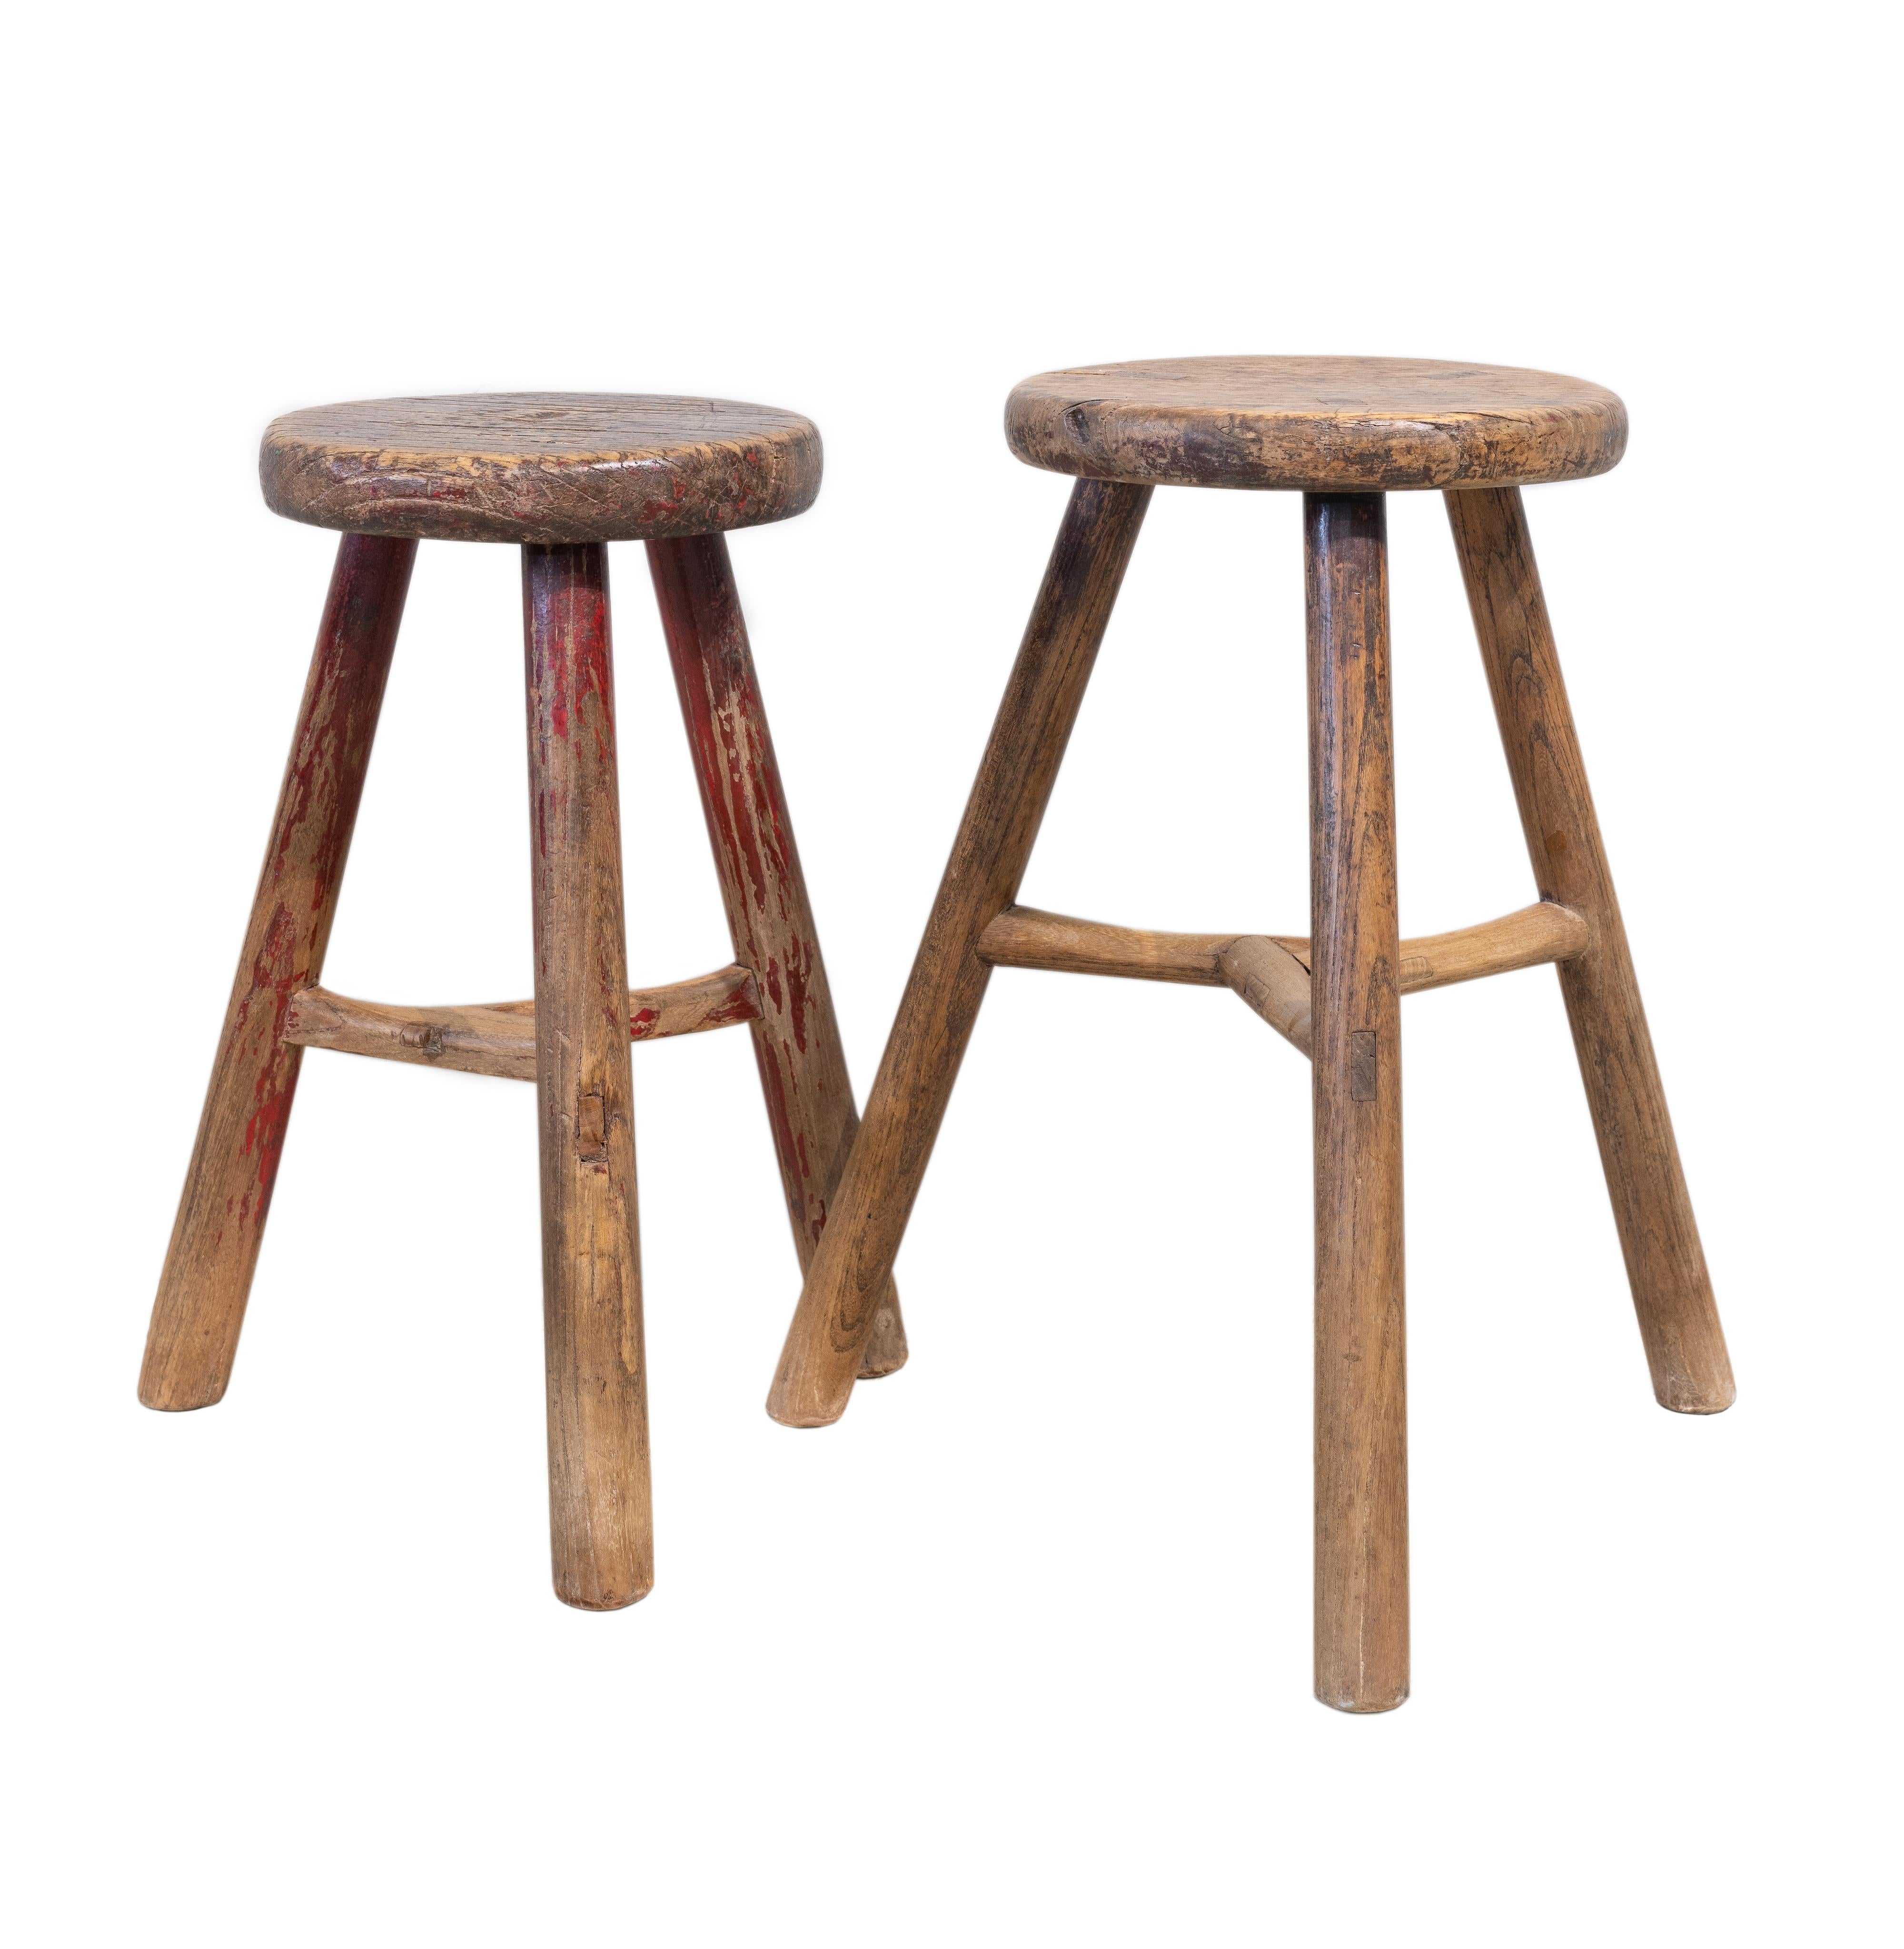 Chinese elmwood round stools with three legs from Shandong province, China. Beautifully worn with a smooth texture and very nice patina. The slightly shorter stool has some faded red paint and a nice solid 4 cm thick seat top, and the joints from